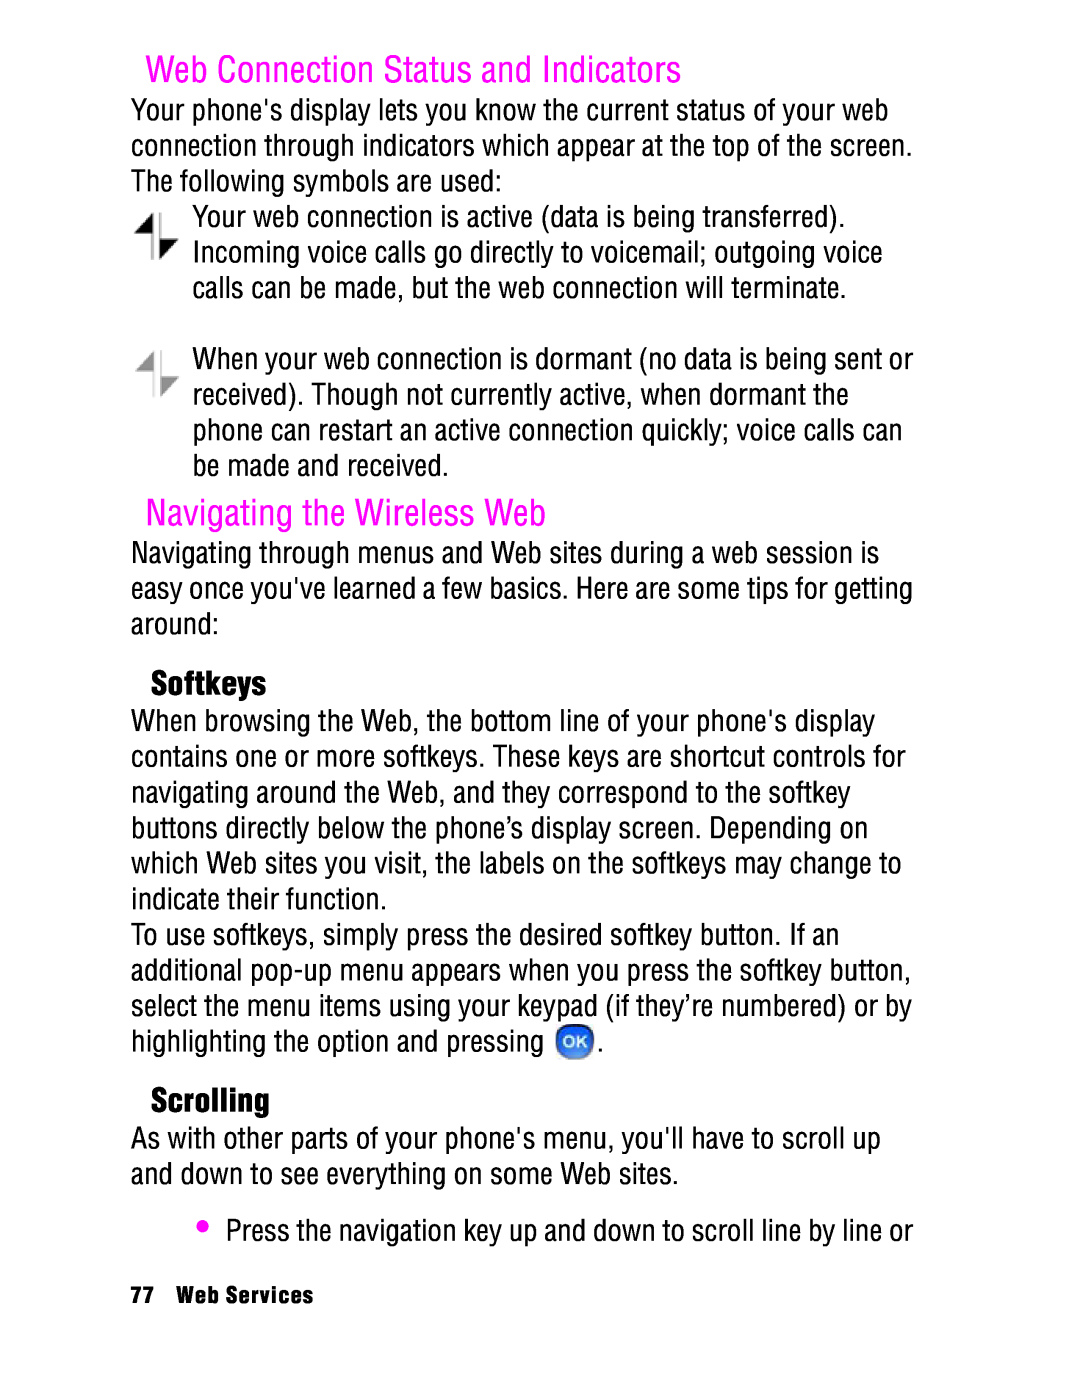 Samsung SPH-a740 manual Web Connection Status and Indicators, Navigating the Wireless Web, Softkeys, Scrolling 